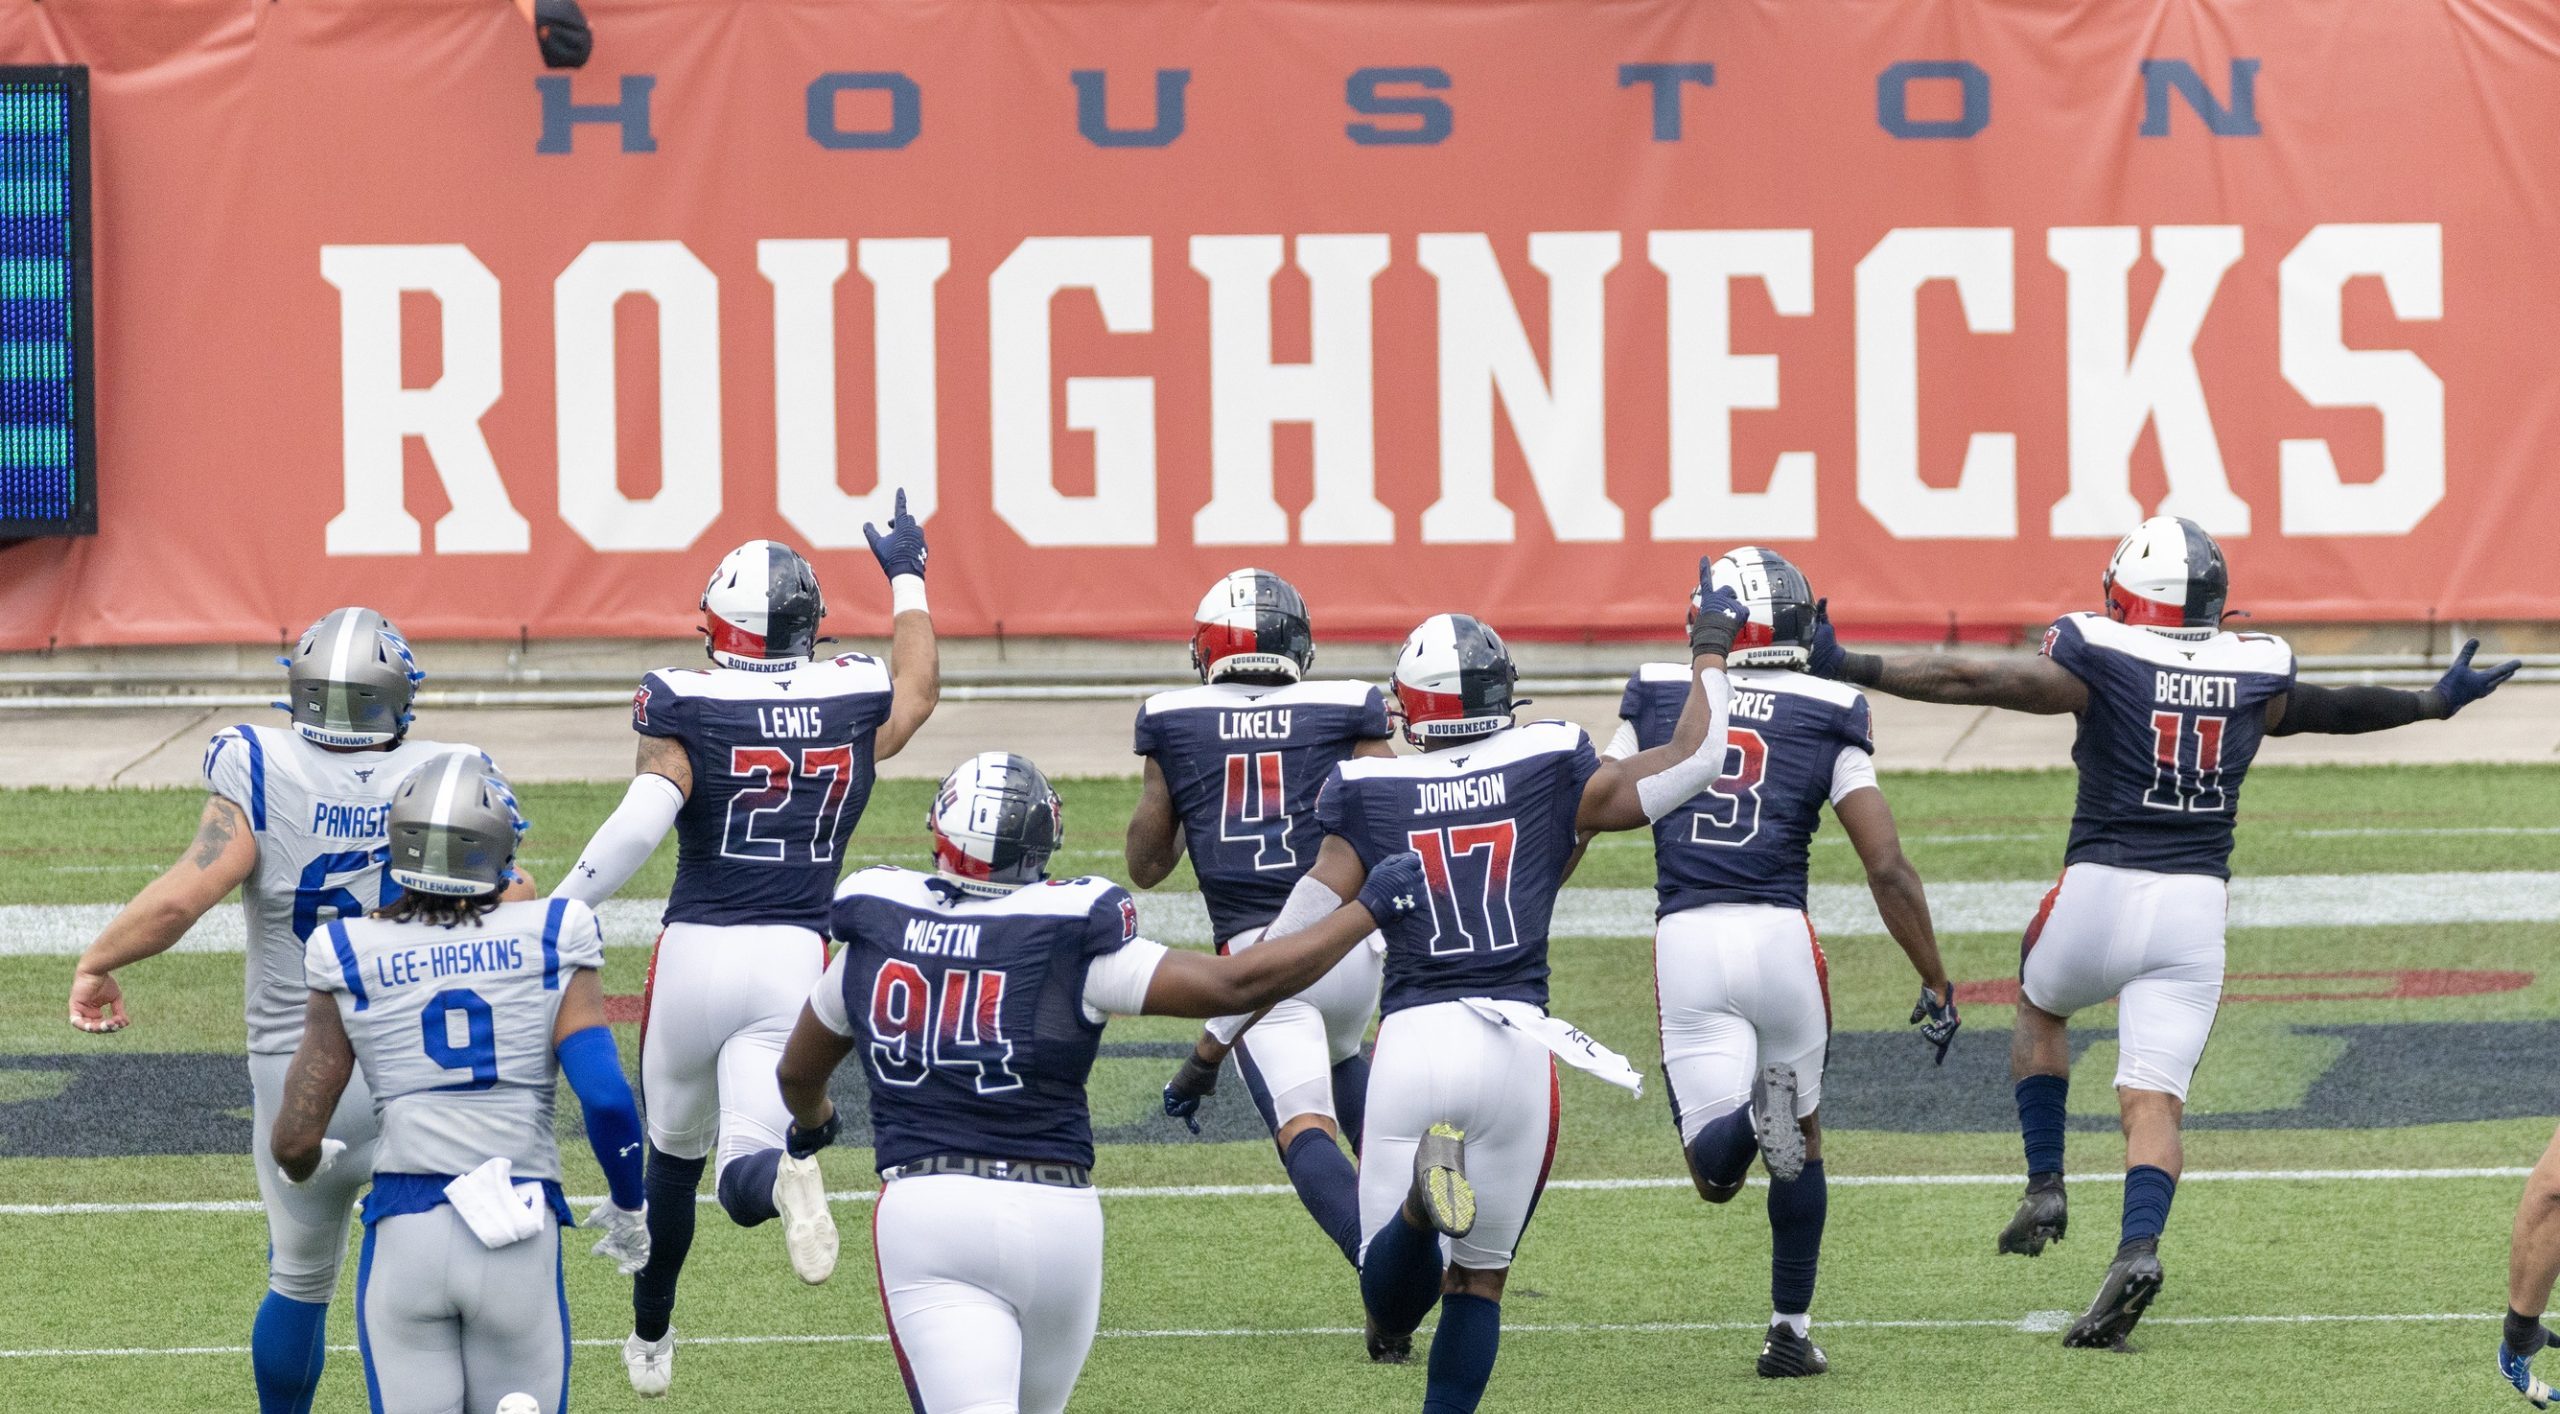 Houston Roughnecks defensive back Willam Like (4) celebrates his fumble recovery for a touchdown against the St. Louis Battlehawks